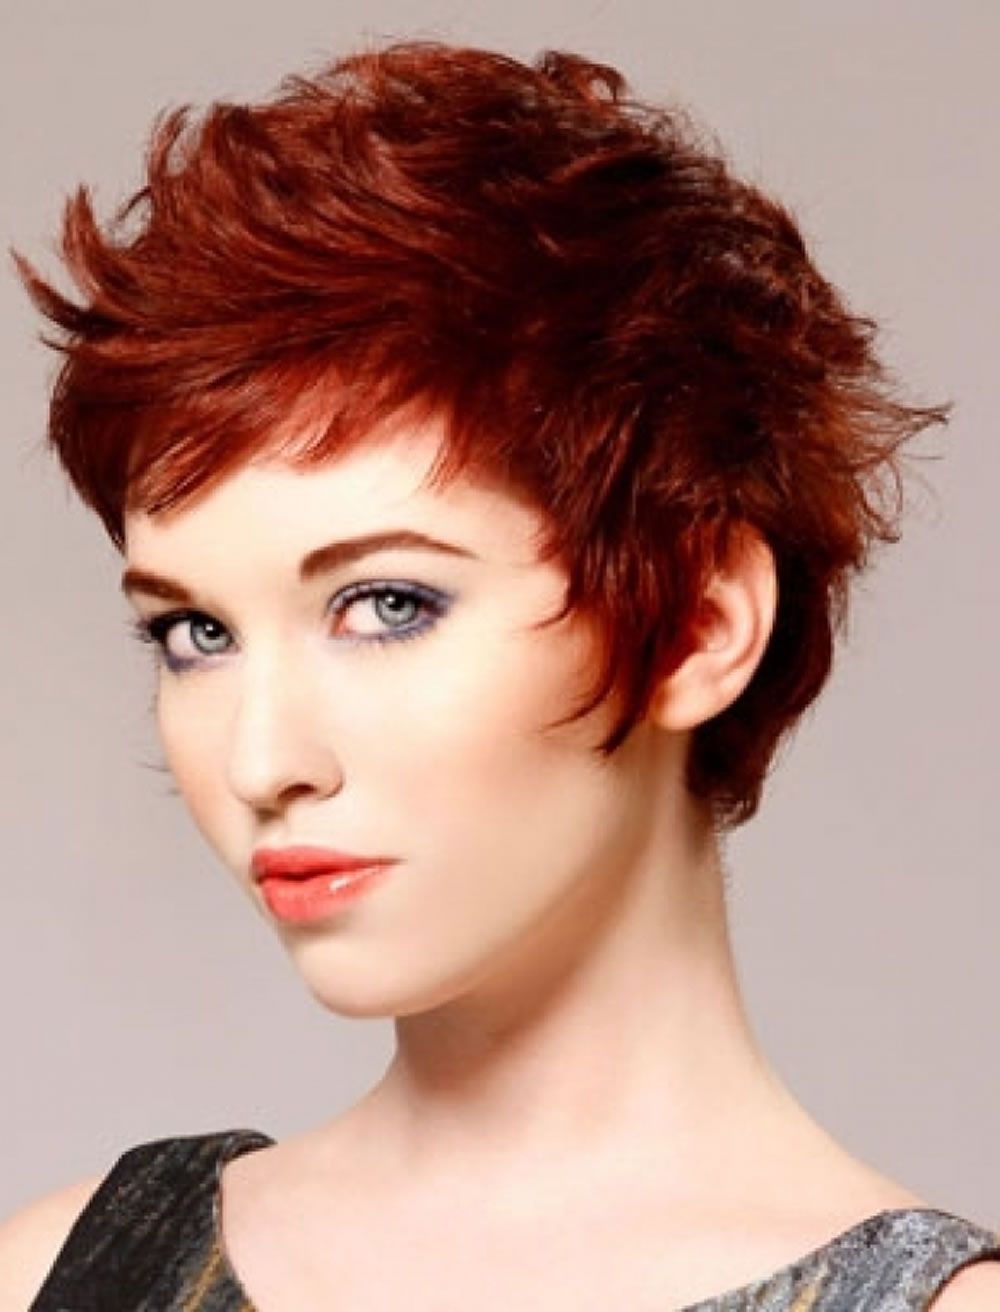 20 Short Haircuts For Red Hair New Design | Matsnilssonmma For Red Short Hairstyles (View 18 of 25)